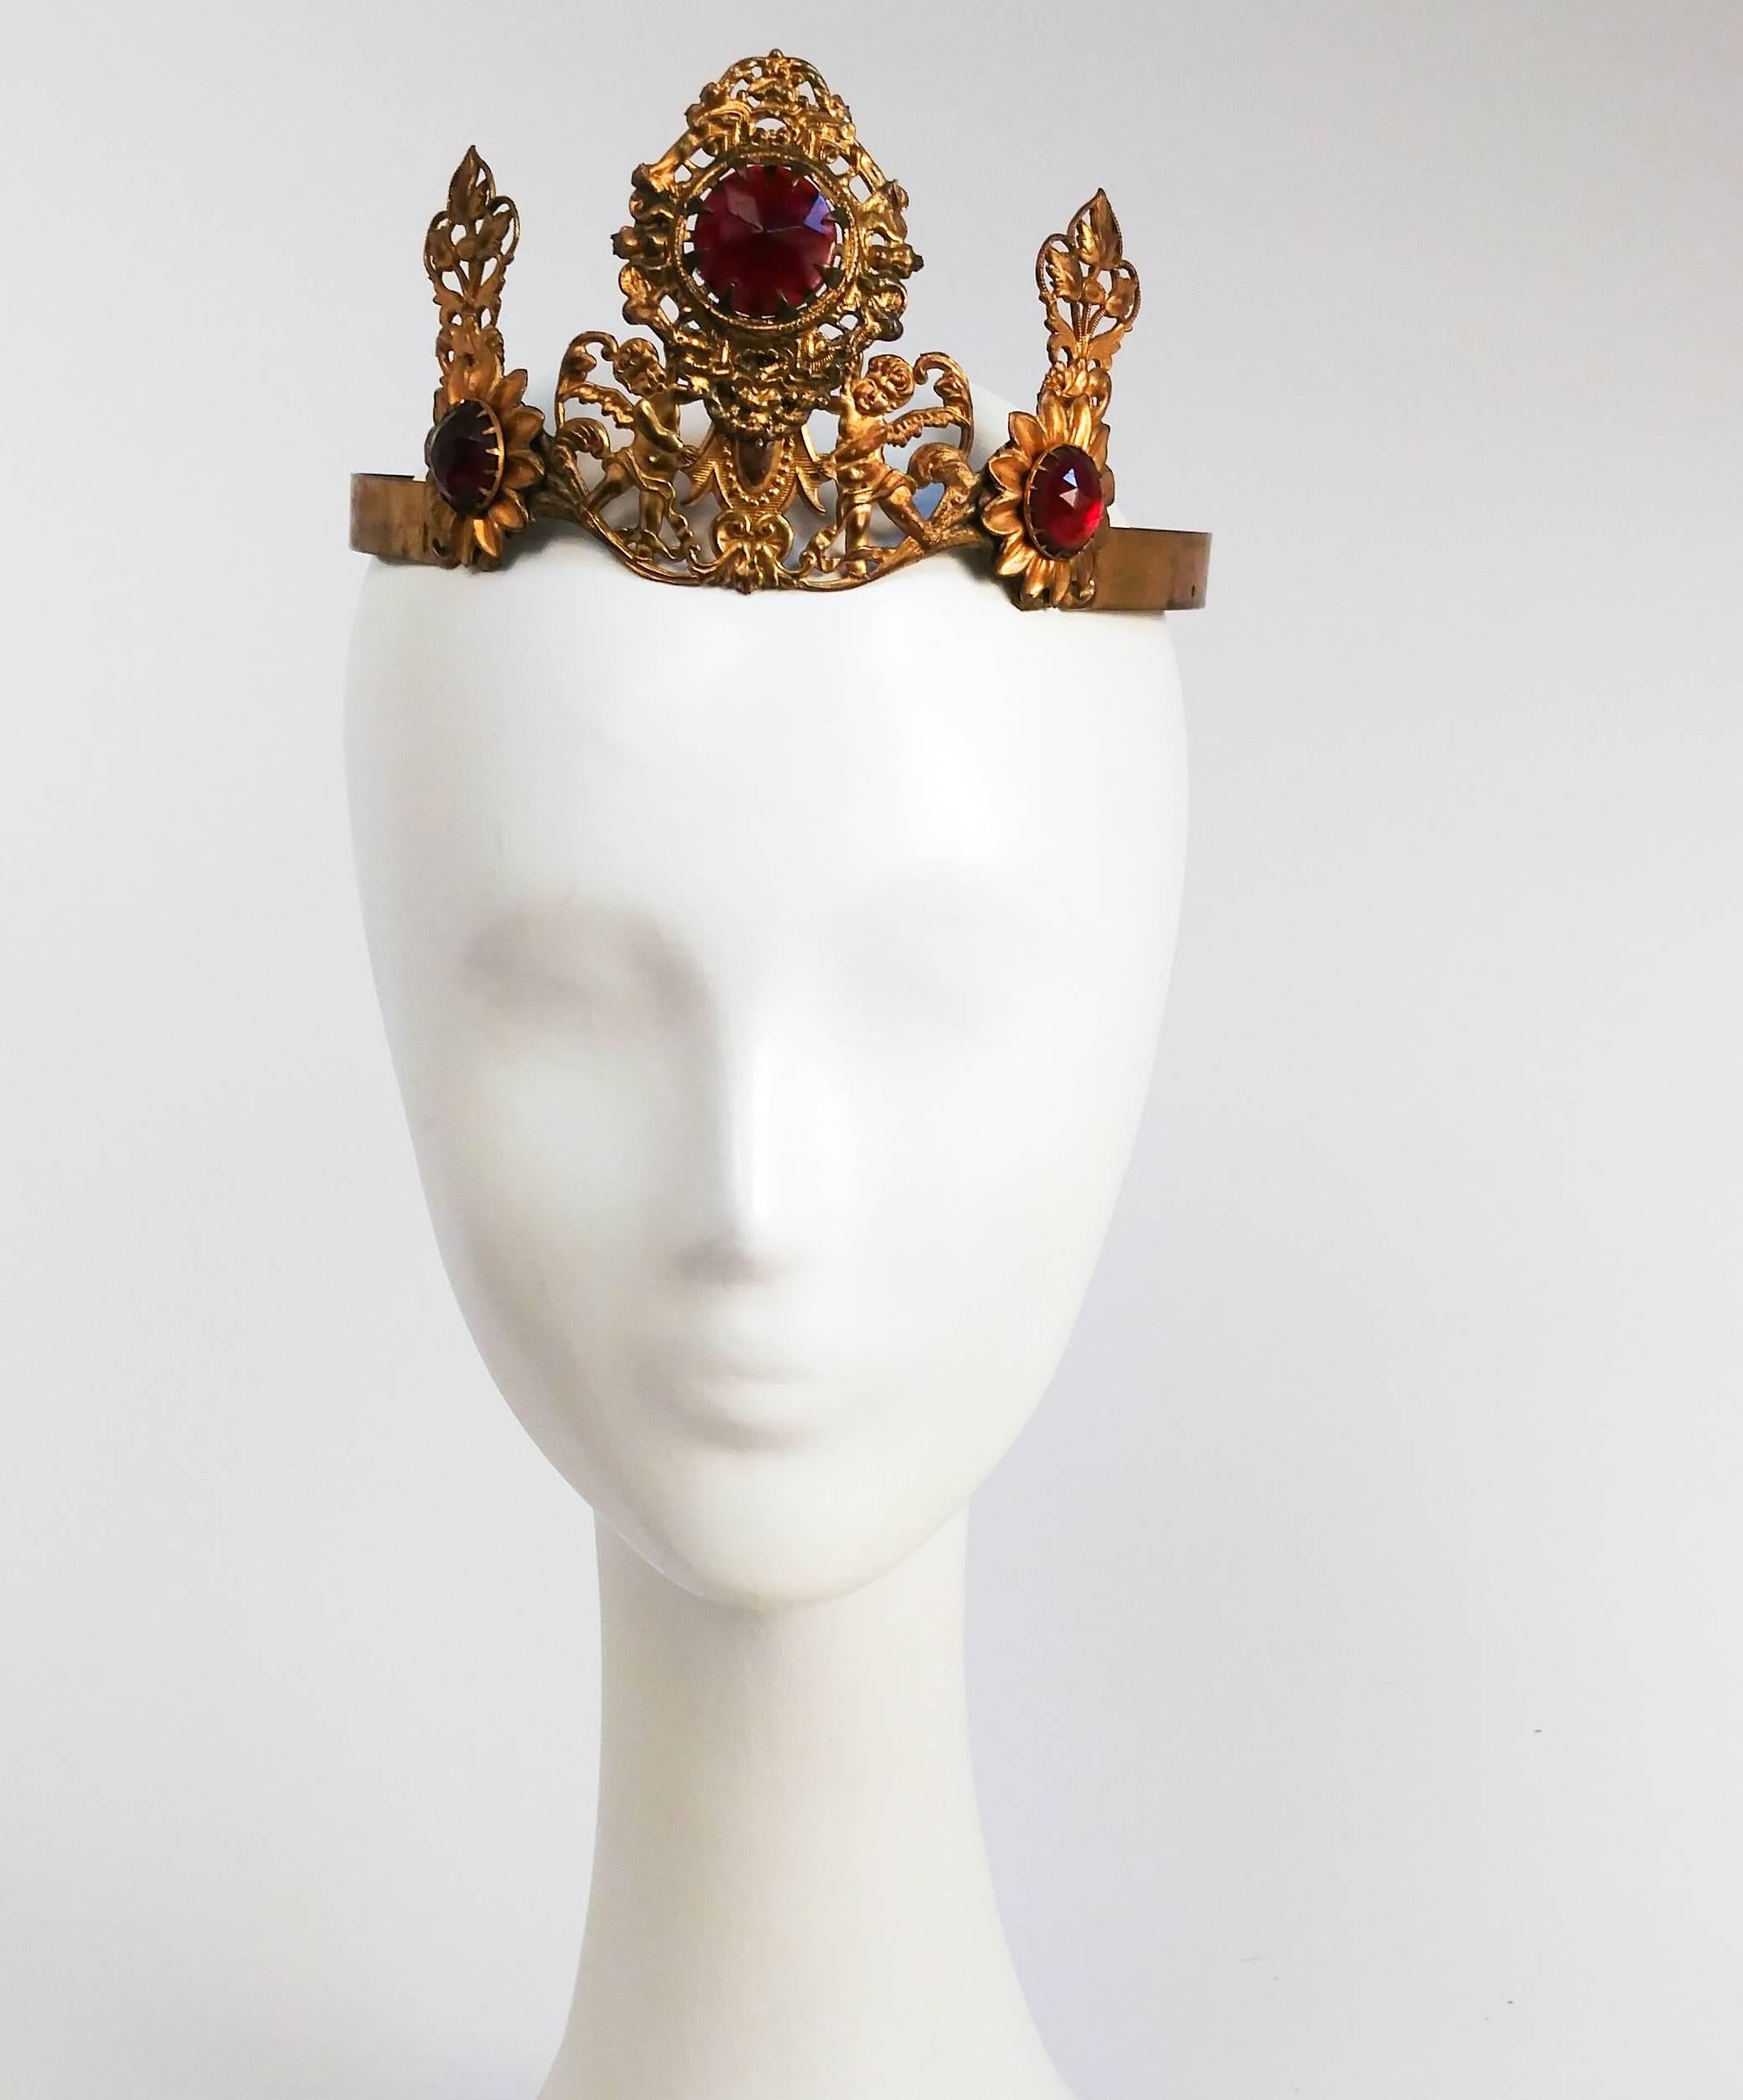 1920s Art Nouveau Brass Crown With Jewels. Adjustable back slides to fit.